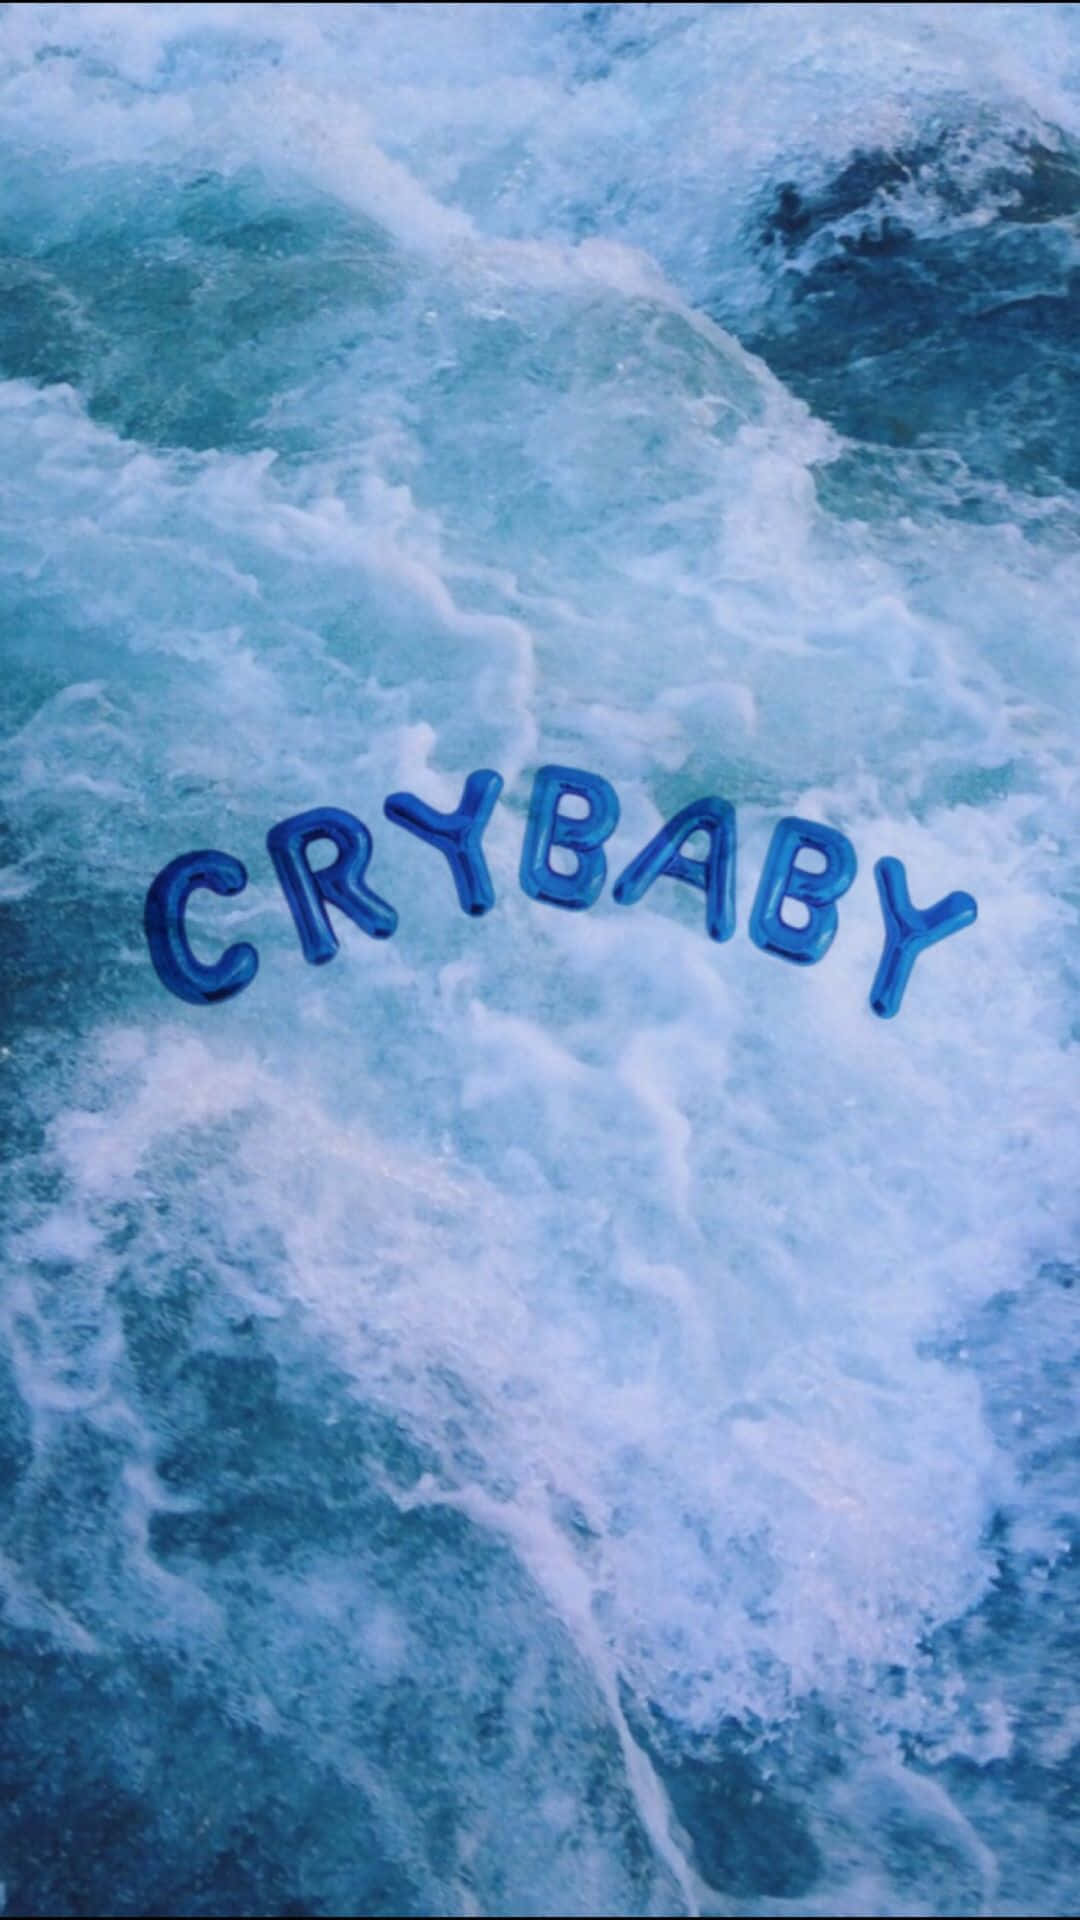 Aesthetic Blue Cry Baby pictures